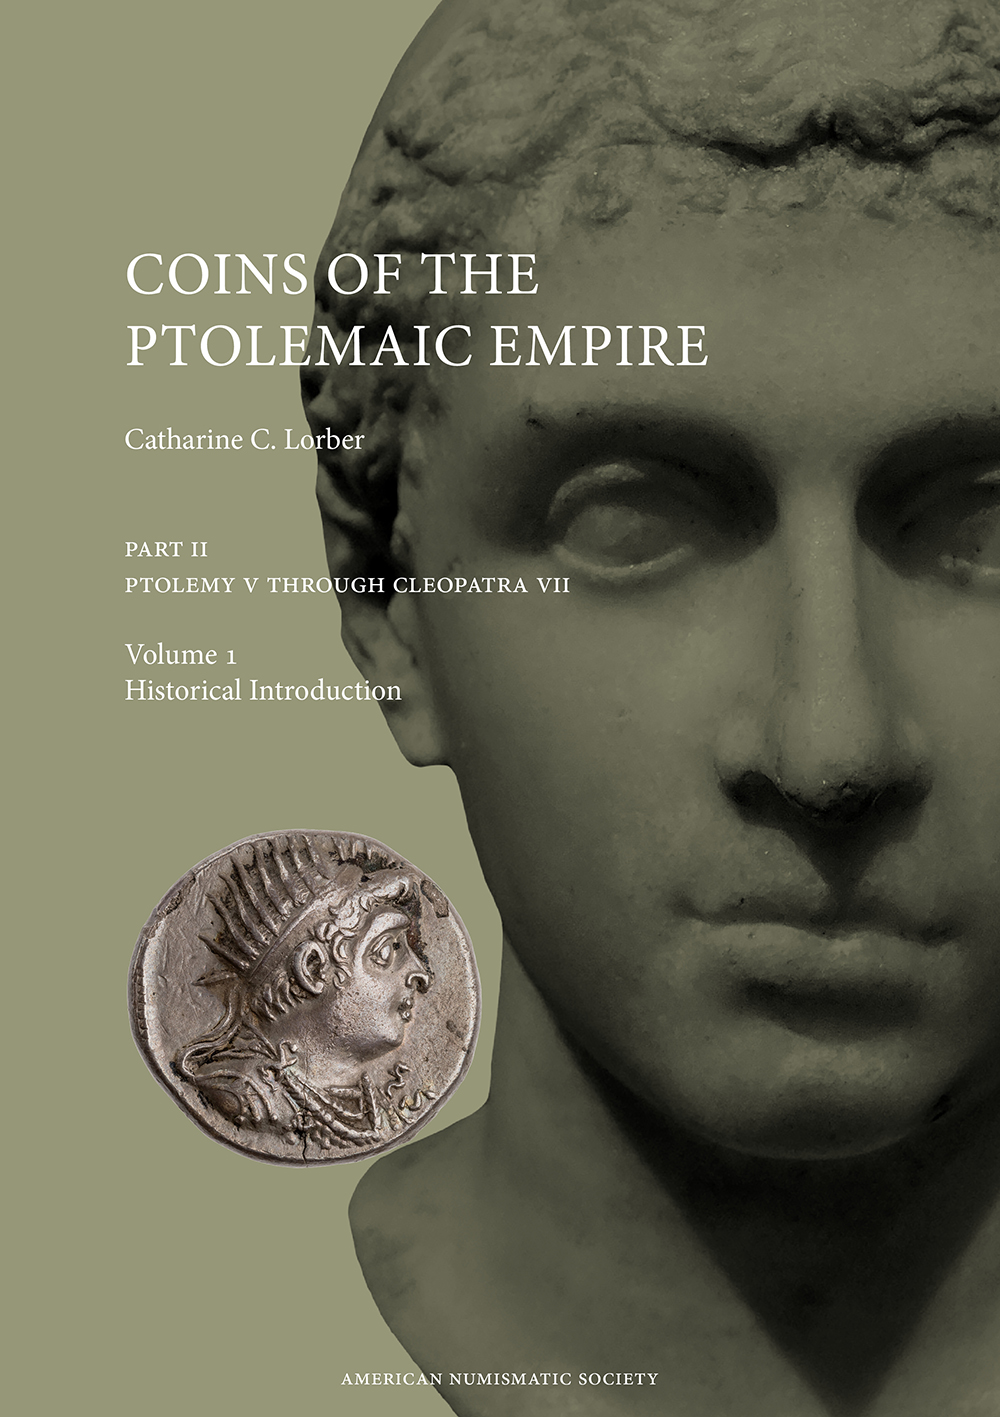 Coins of the Ptolemaic Empire, Part 2: Ptolemy V through Cleopatra VII (3 vols.)